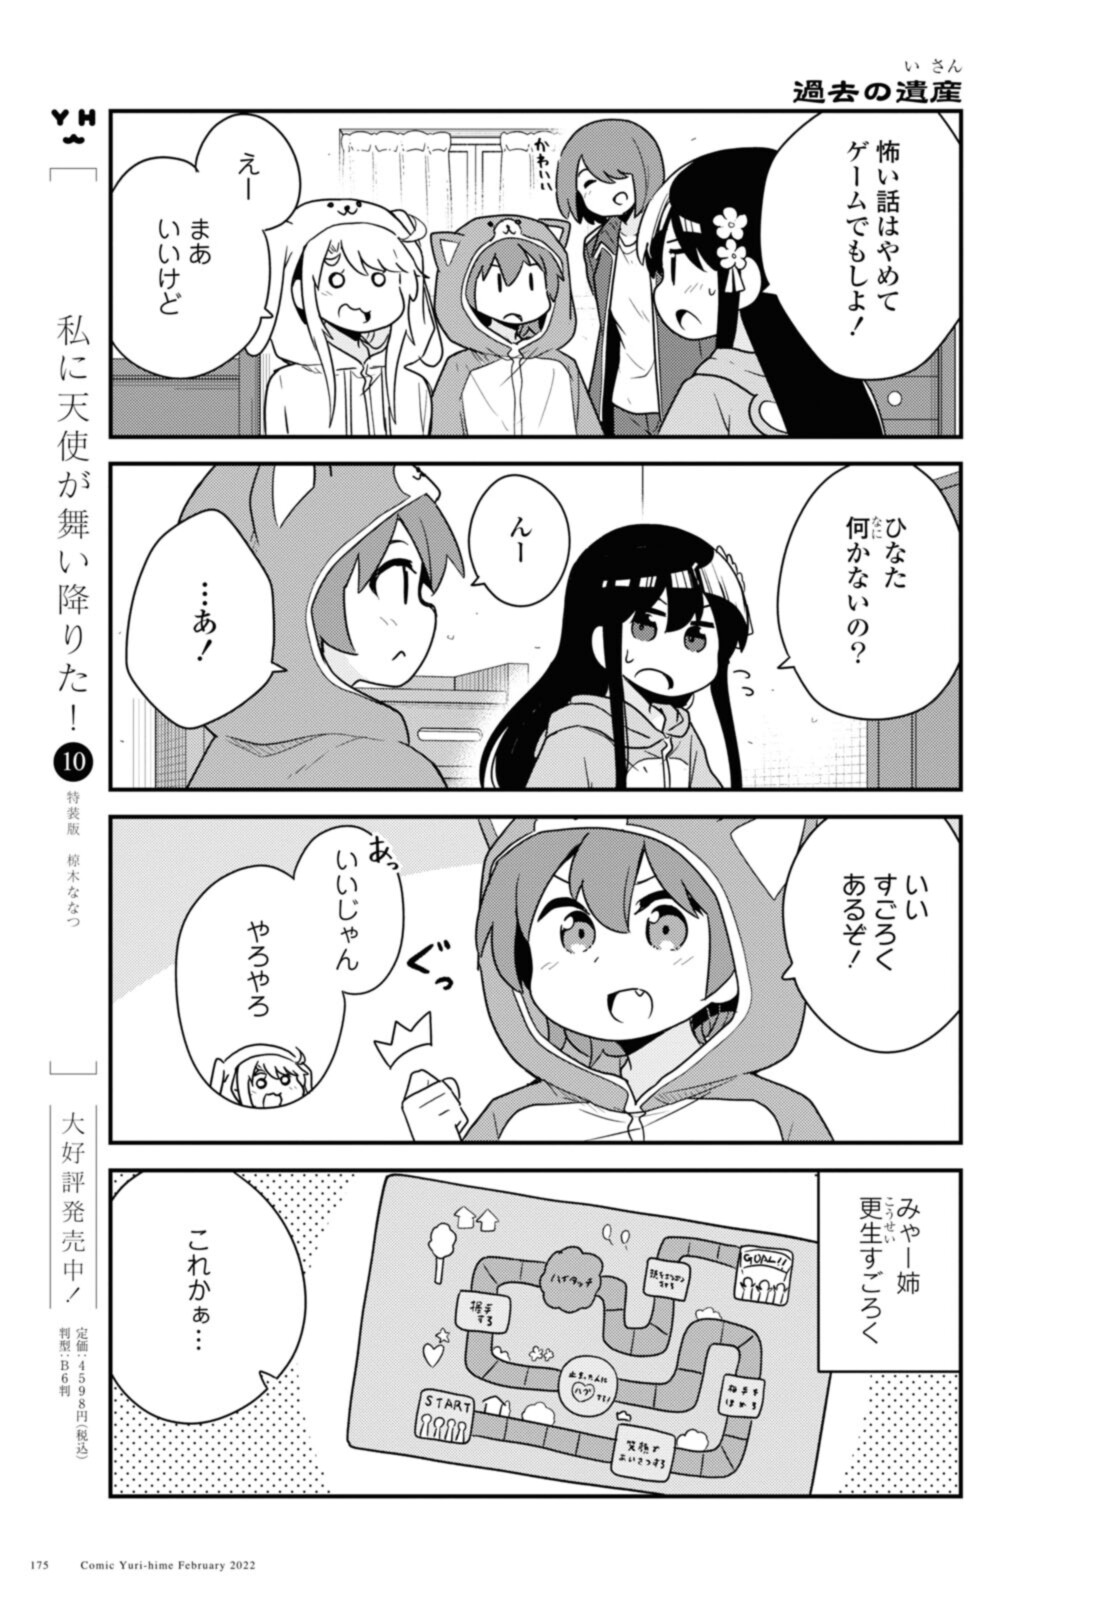 Wataten! An Angel Flew Down to Me 私に天使が舞い降りた！ 第92話 - Page 11